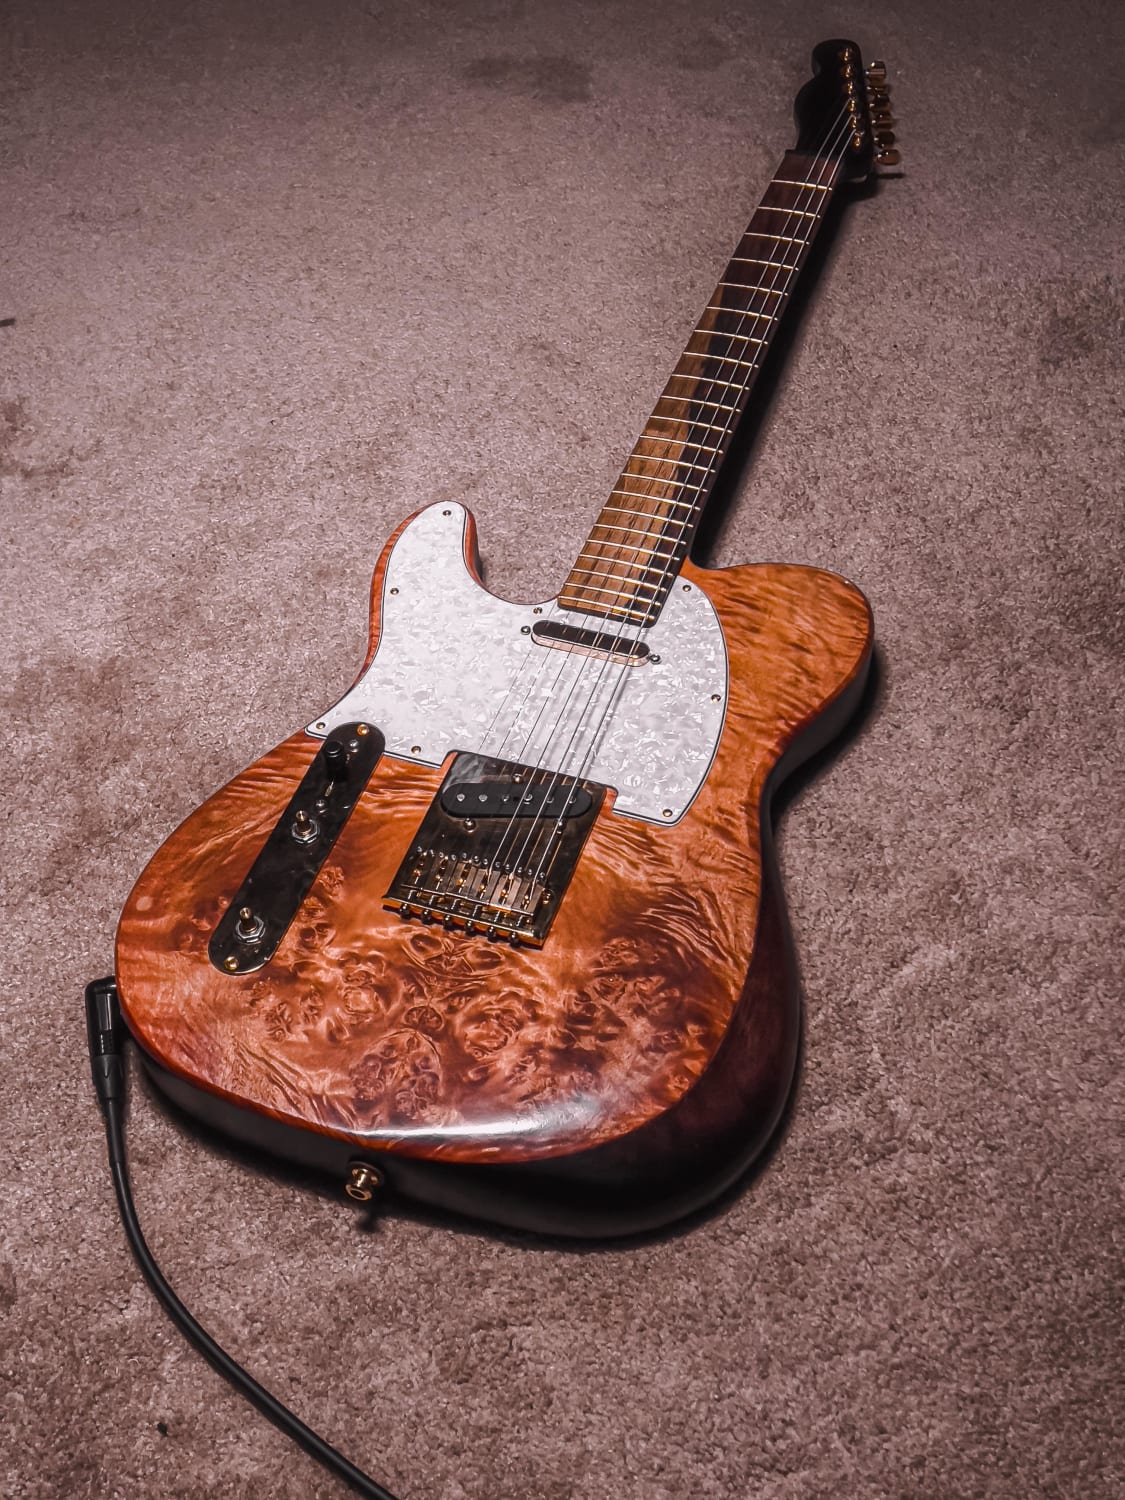 Although an instrument, this is my first guitar I’ve ever built. This was built with almost all hand tools. Used a router for the electronic cavities and a drill press for any holes that needed to be that perfect. Thank you for stopping to look at it.